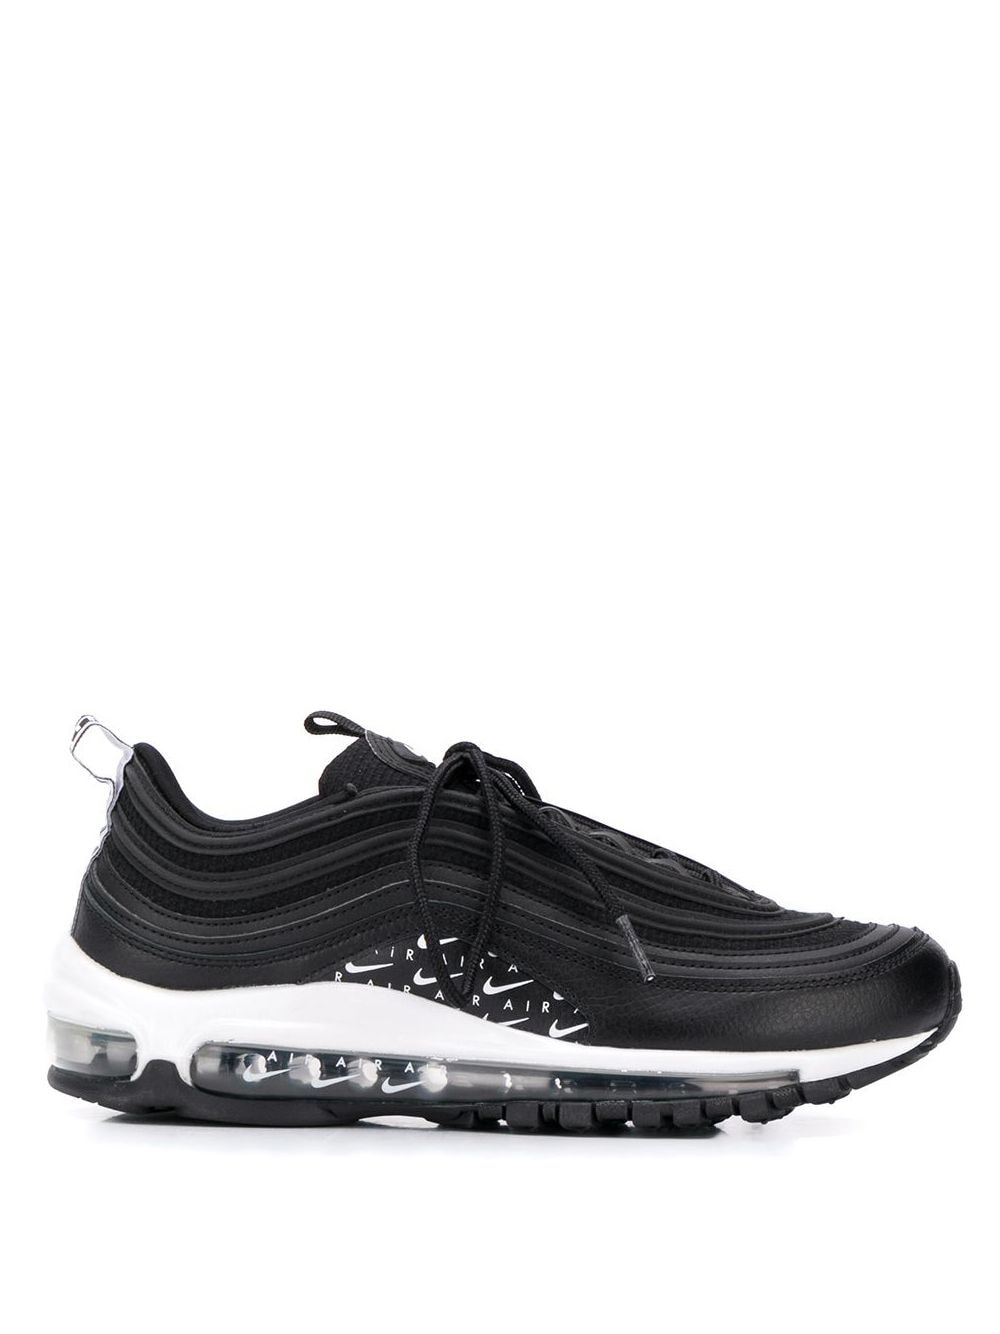 nike air max 97 lx overbranded